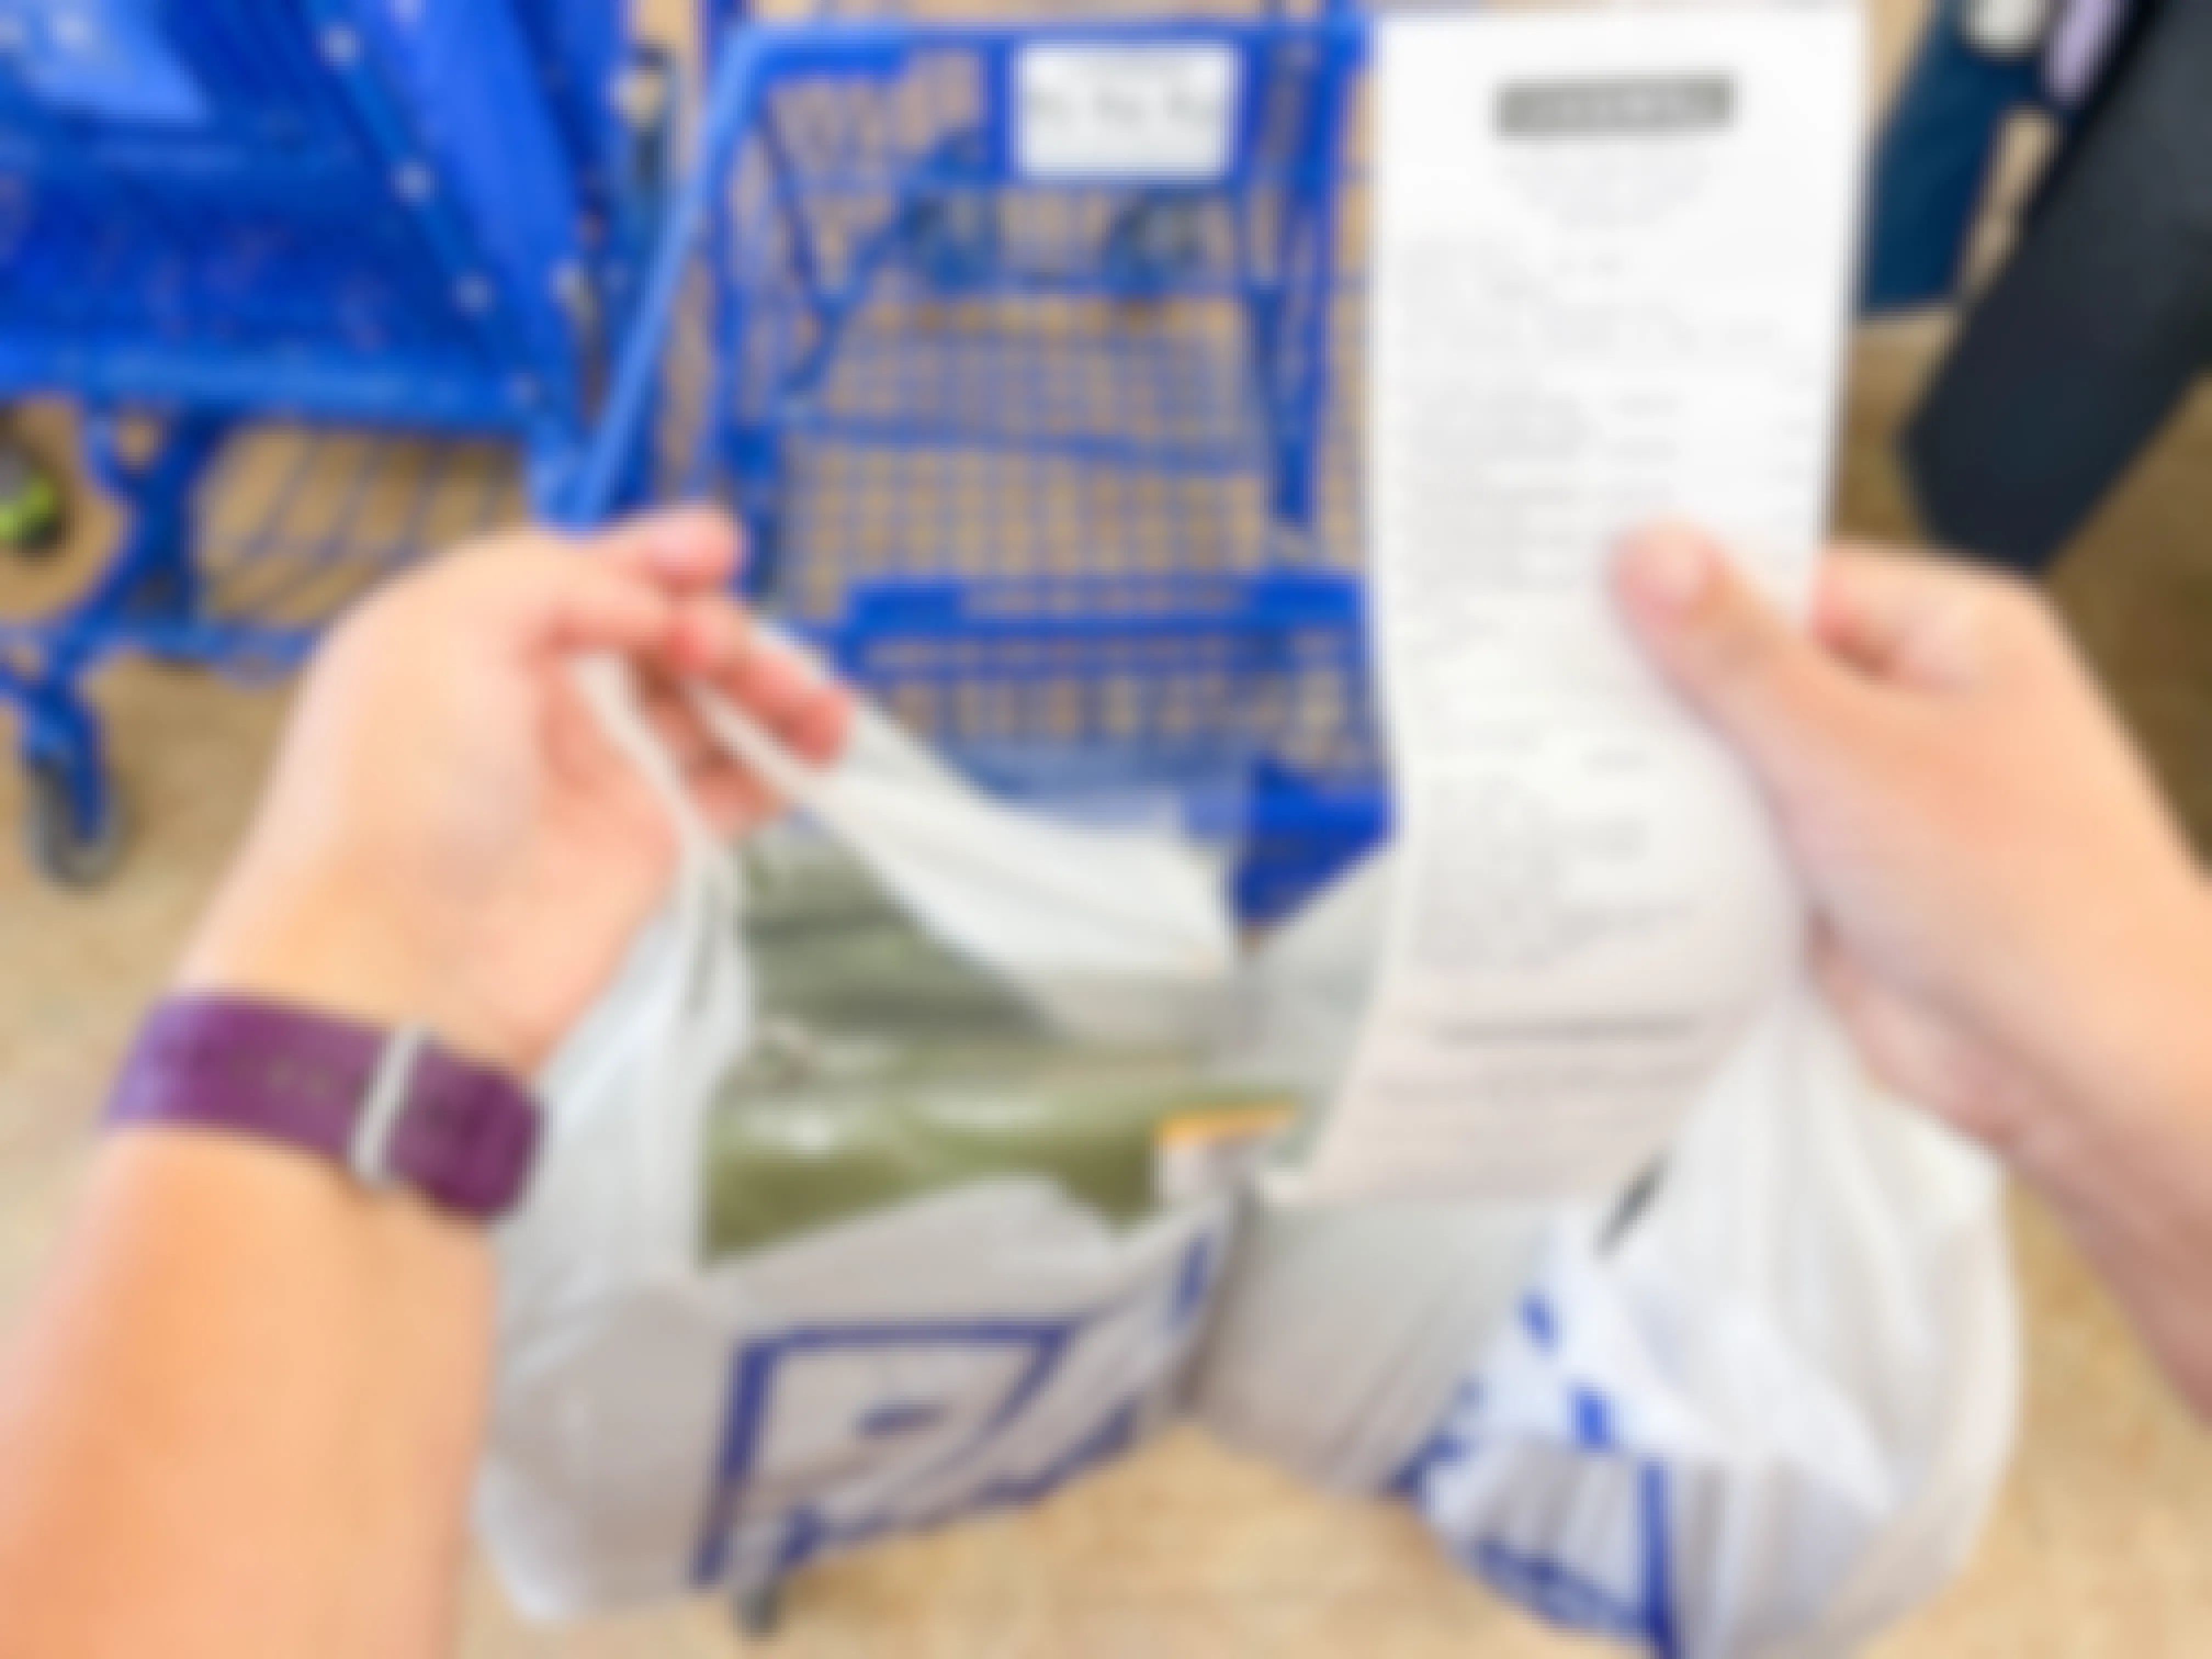 a goodwill receipt being held with shopping bag